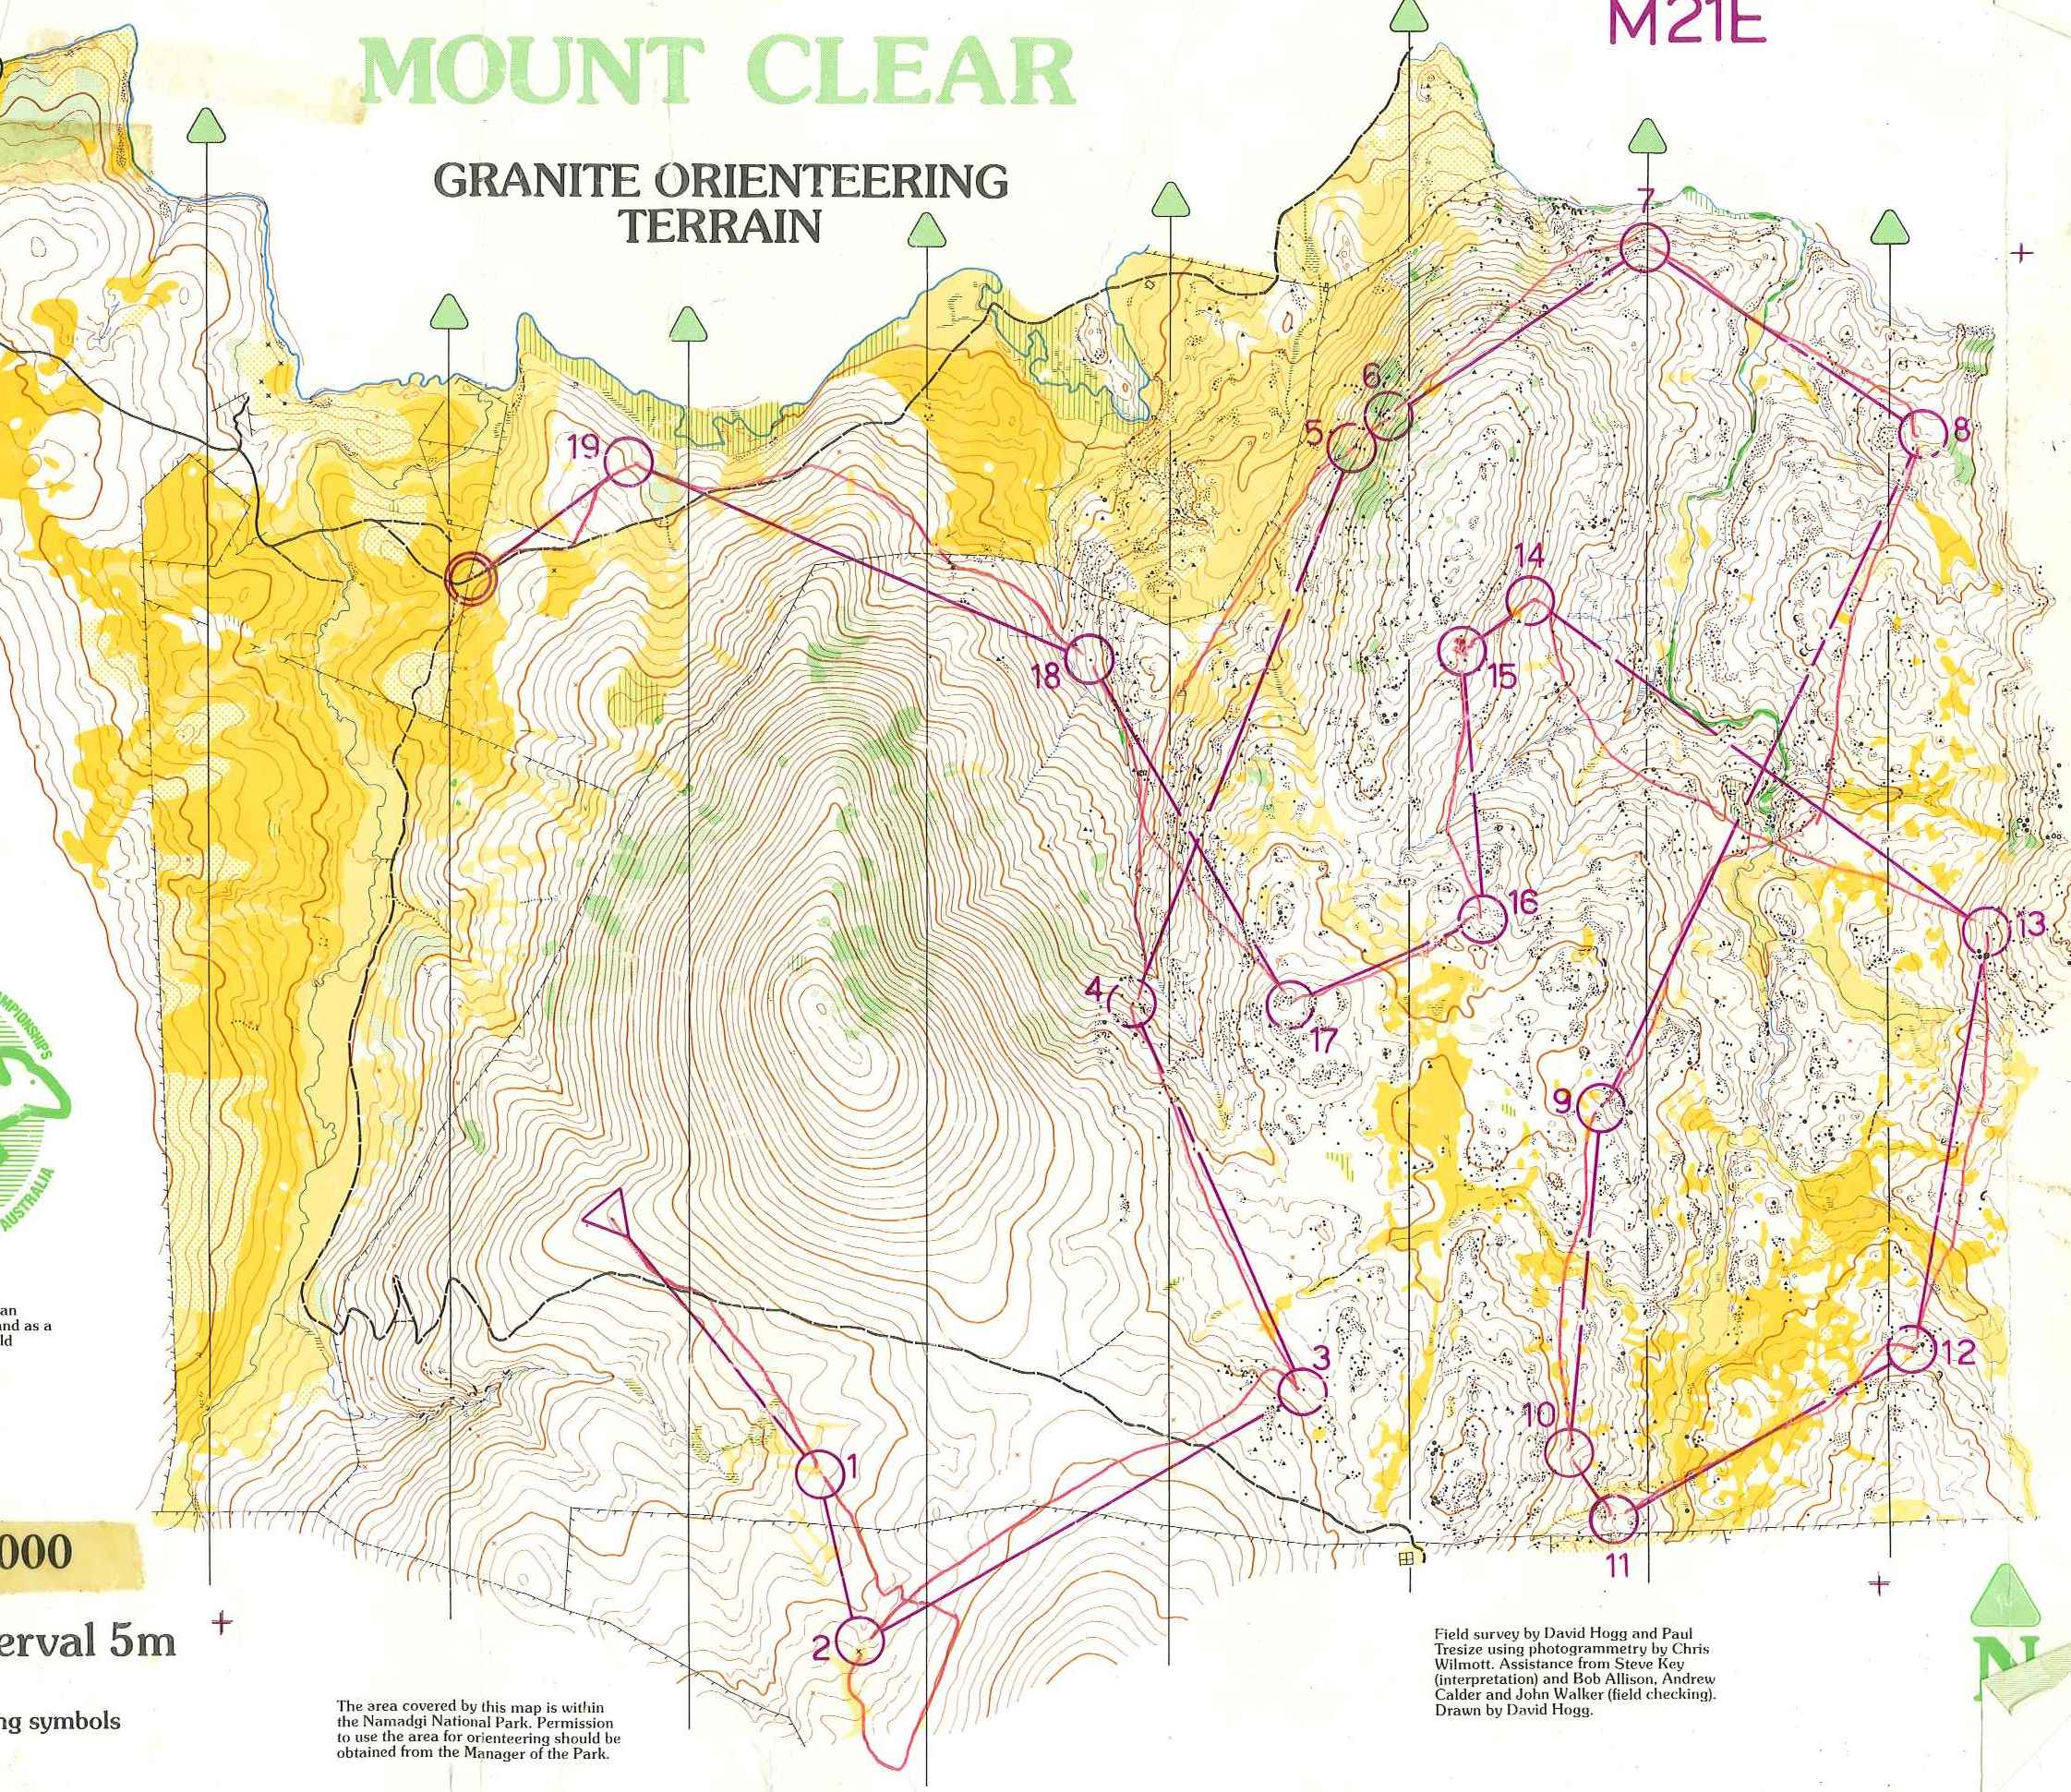 Mount Clear (31.03.1985)